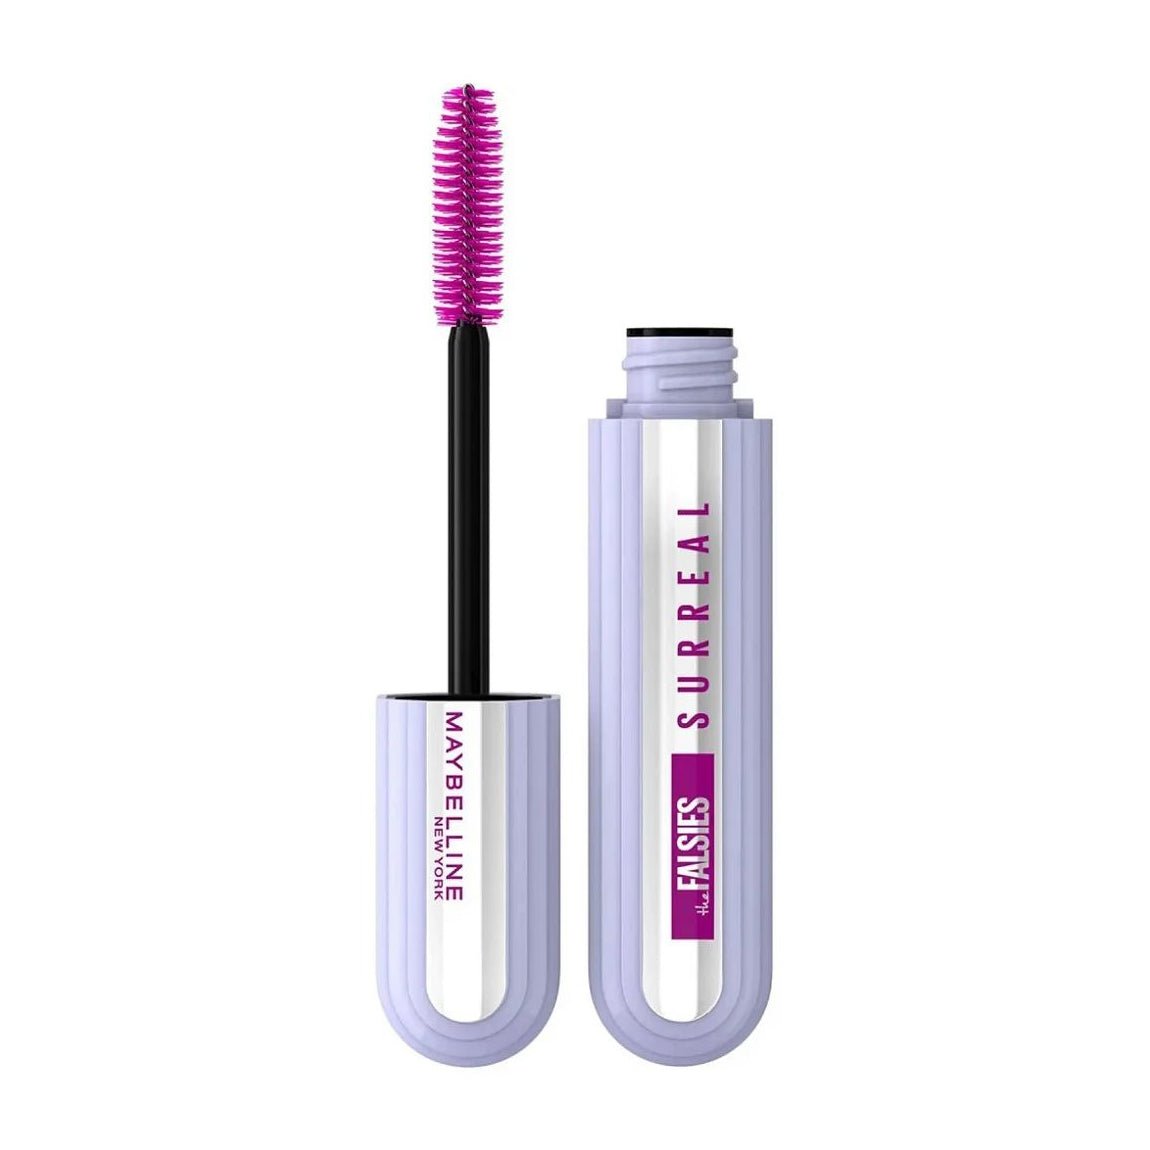 Maybelline The Falsies Surreal Extensions Mascara – 01 Very Black - Bloom Pharmacy